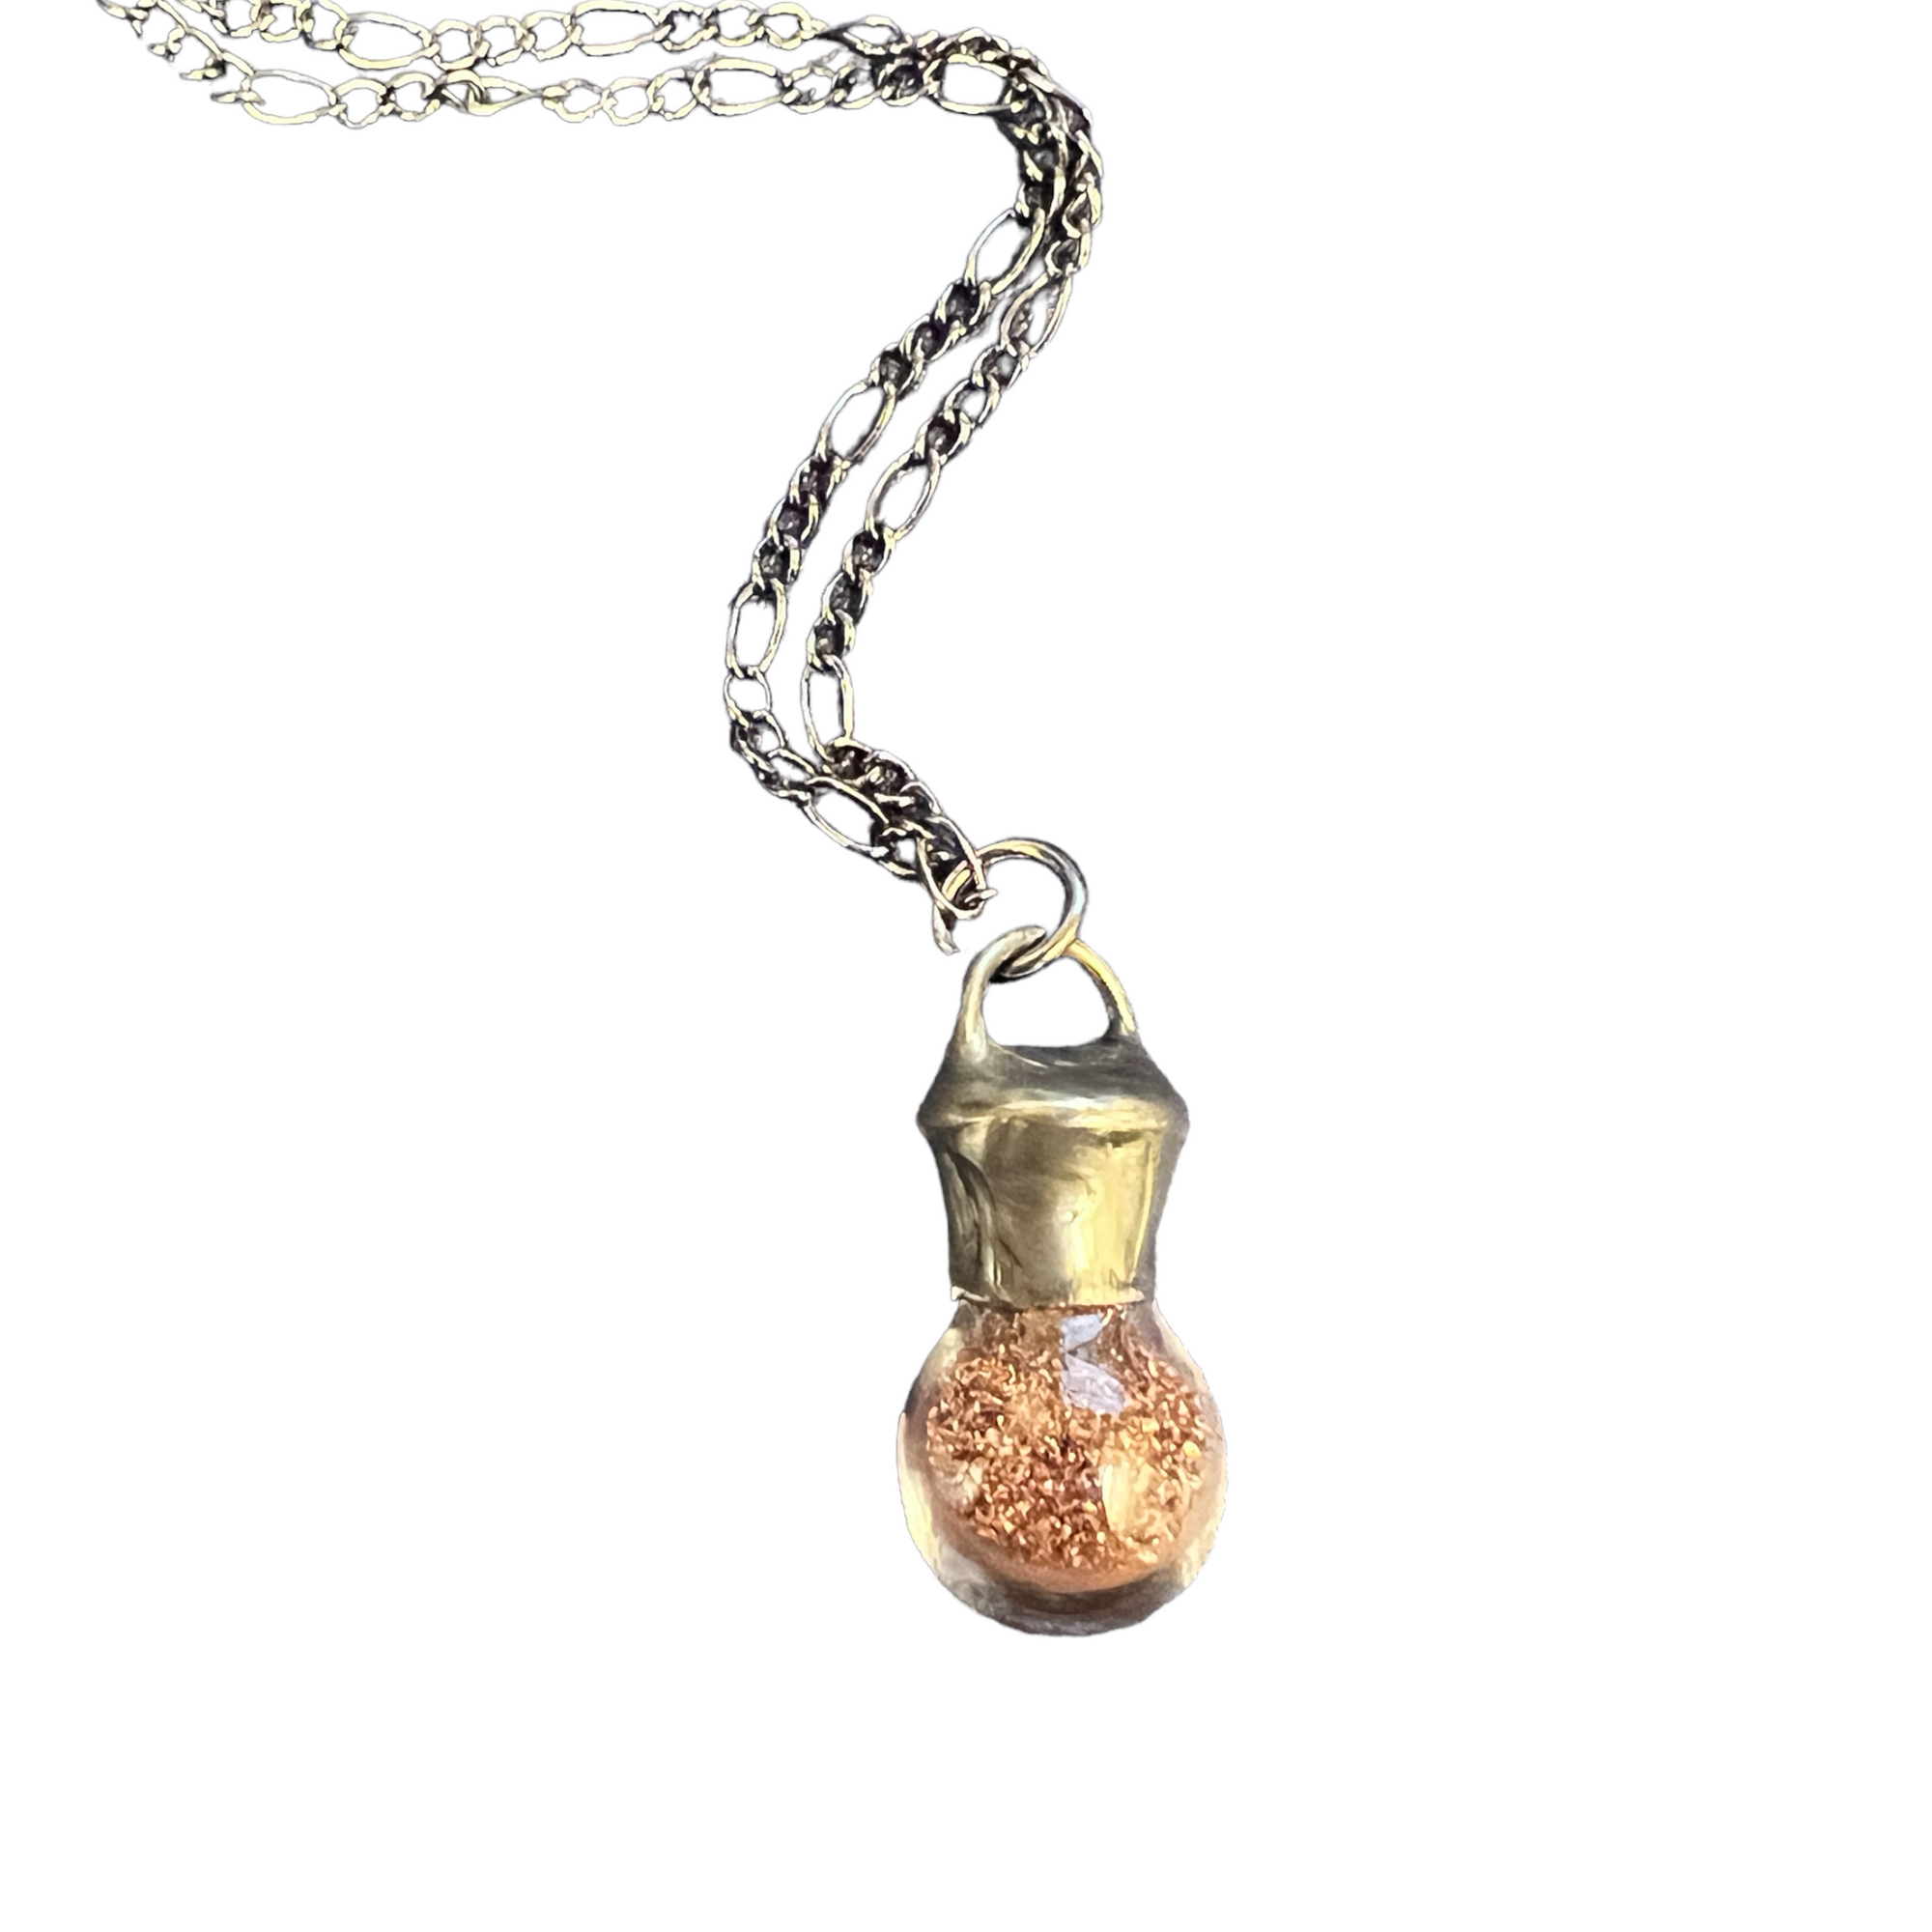 Reliquary Pendant with Custom made and filled with authentic Atocha Shipwreck Copper